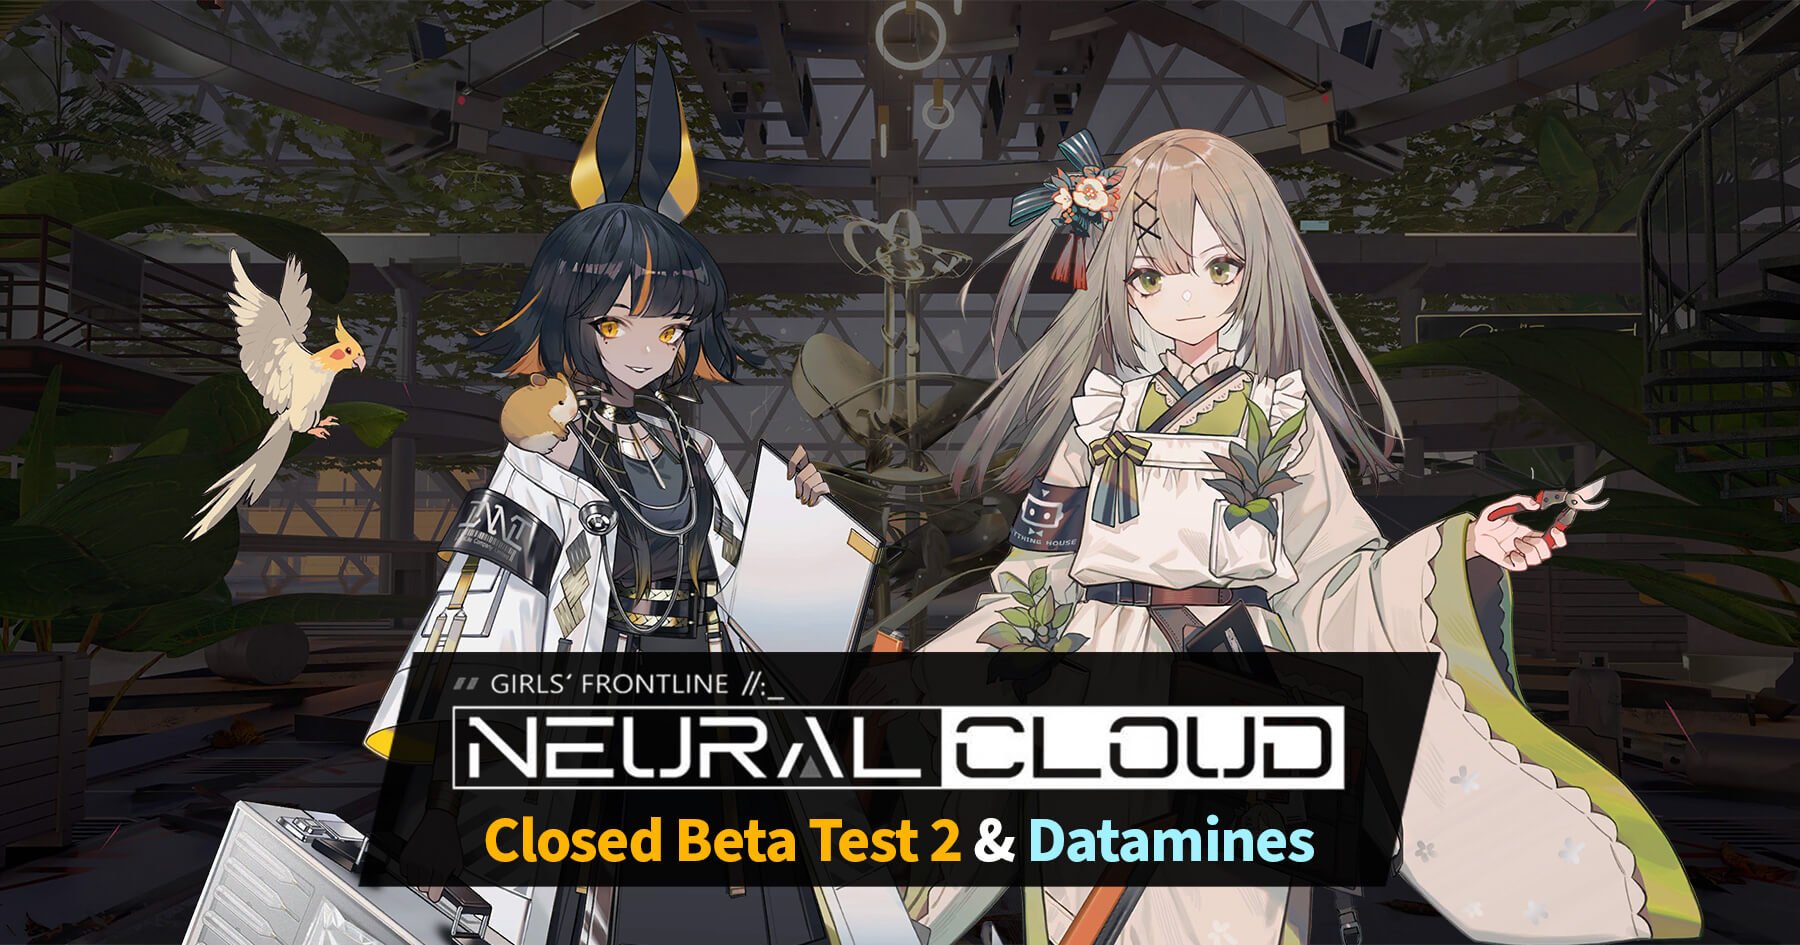 Project Neural Cloud's second round of Closed Beta starts very soon on Dec 2 at 1600 Beijing Time (3AM EST). The client has already been datamined, however, and there's quite a lot of new stuff that we can expect to see this time! Read on for more information...